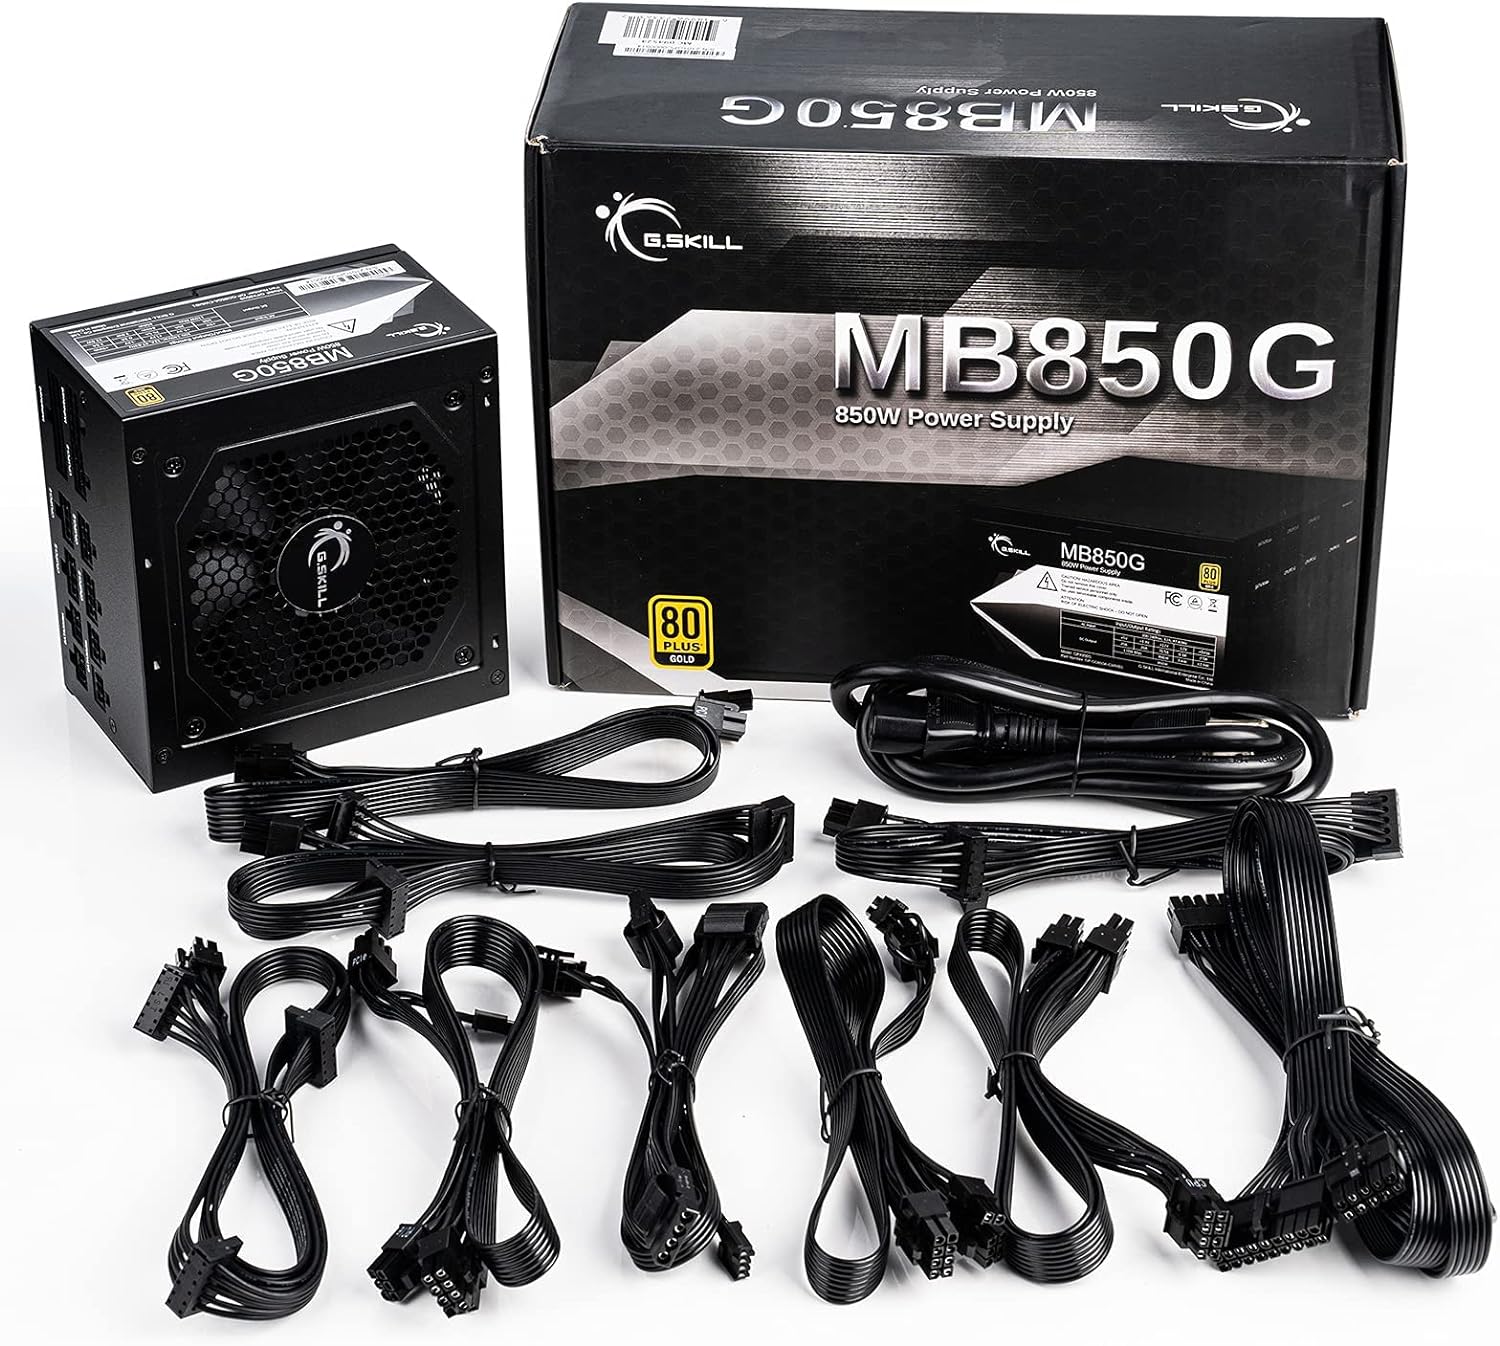 G.Skill MB850G PSU, 80 Plus Gold, Fully Modular ATX Power Supply 850 Watt, Compact 140mm Size, 120mm Cooling Fan, Gaming Computer Power Supply